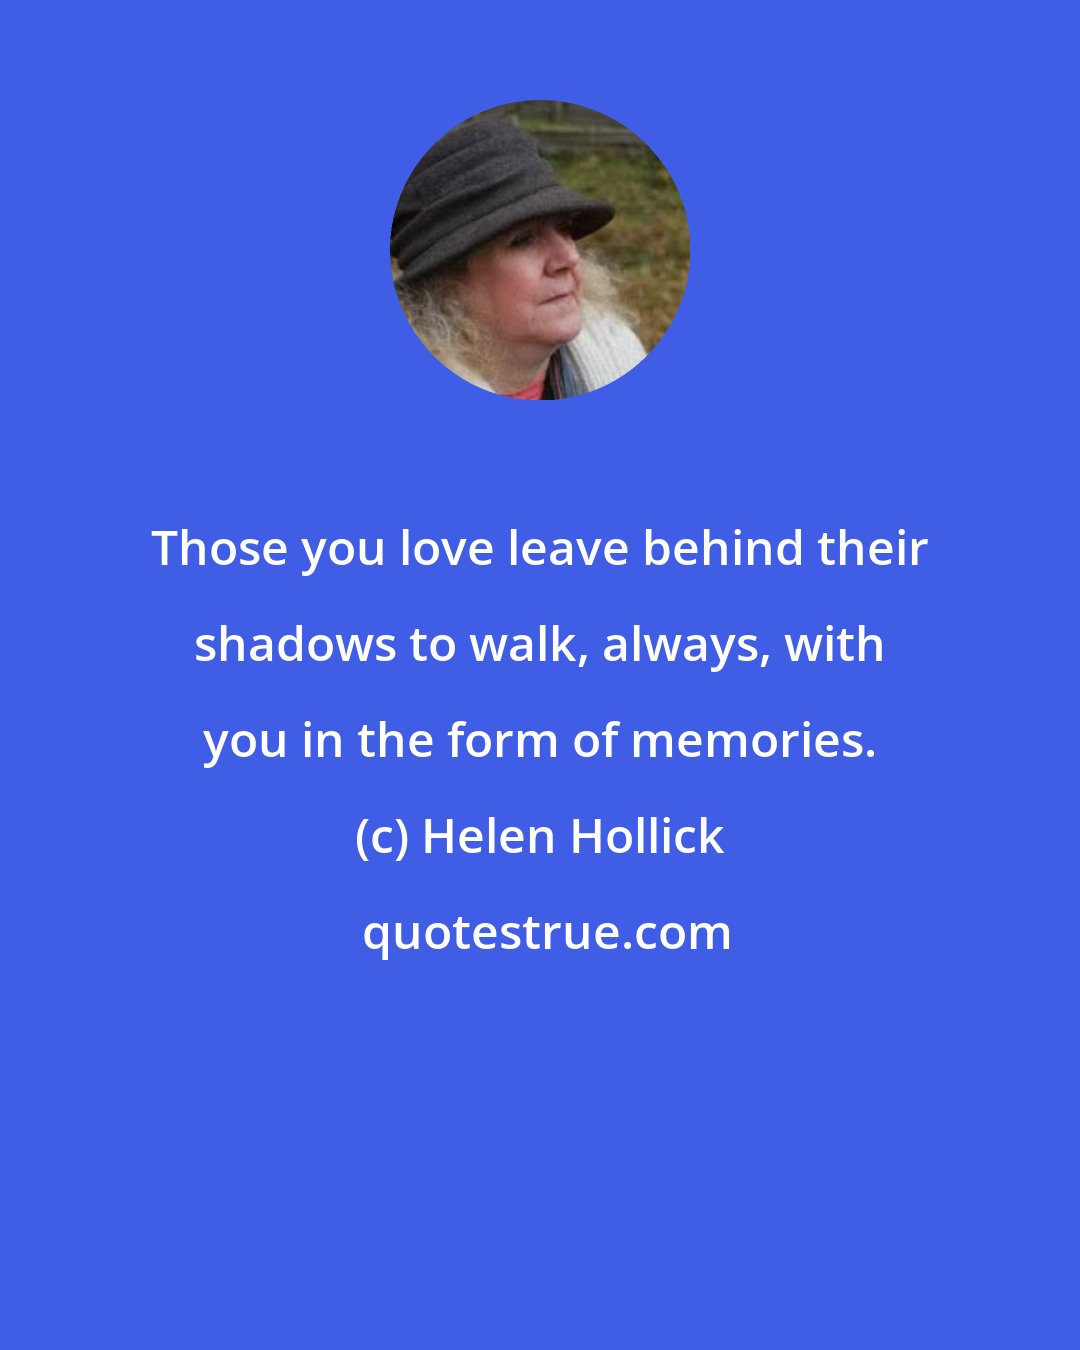 Helen Hollick: Those you love leave behind their shadows to walk, always, with you in the form of memories.